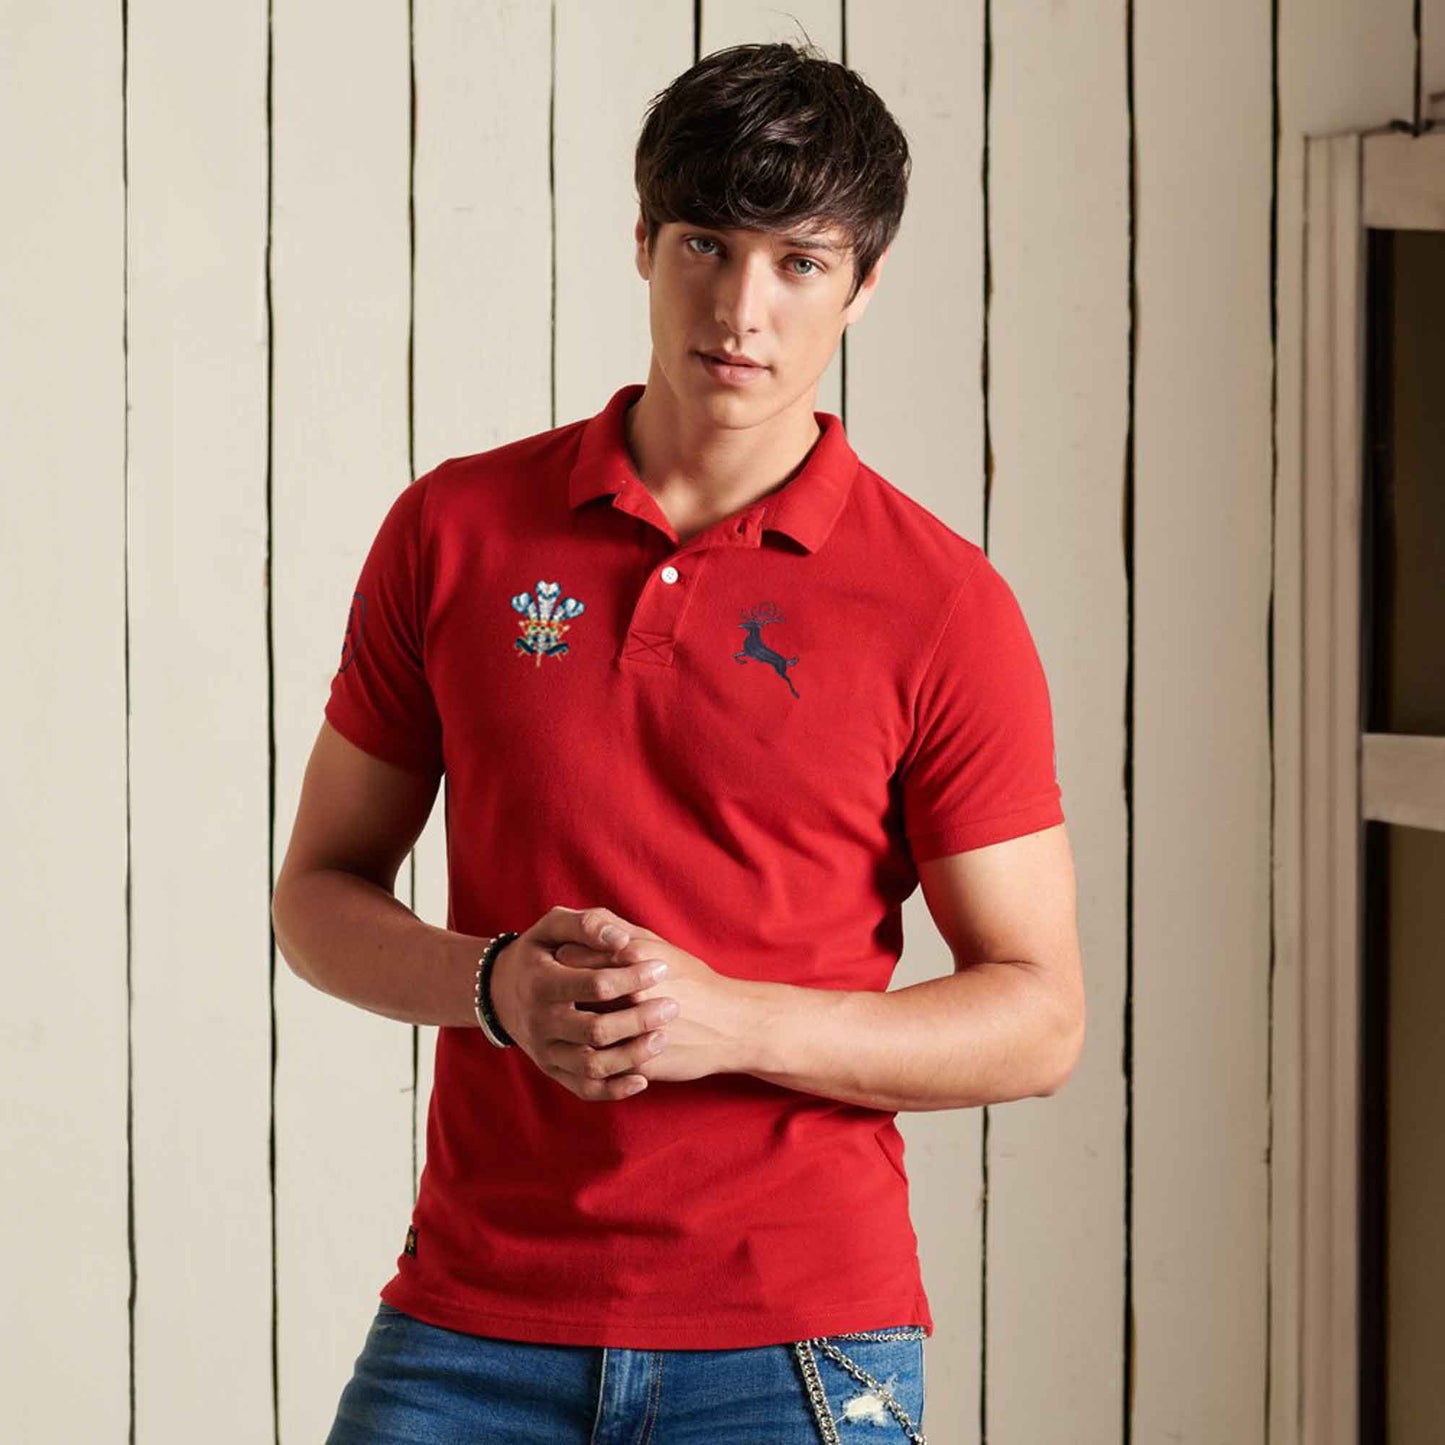 Polo Republica Men's Deer Feathers & 9 Embroidered Short Sleeve Polo Shirt Men's Polo Shirt Polo Republica Red S 